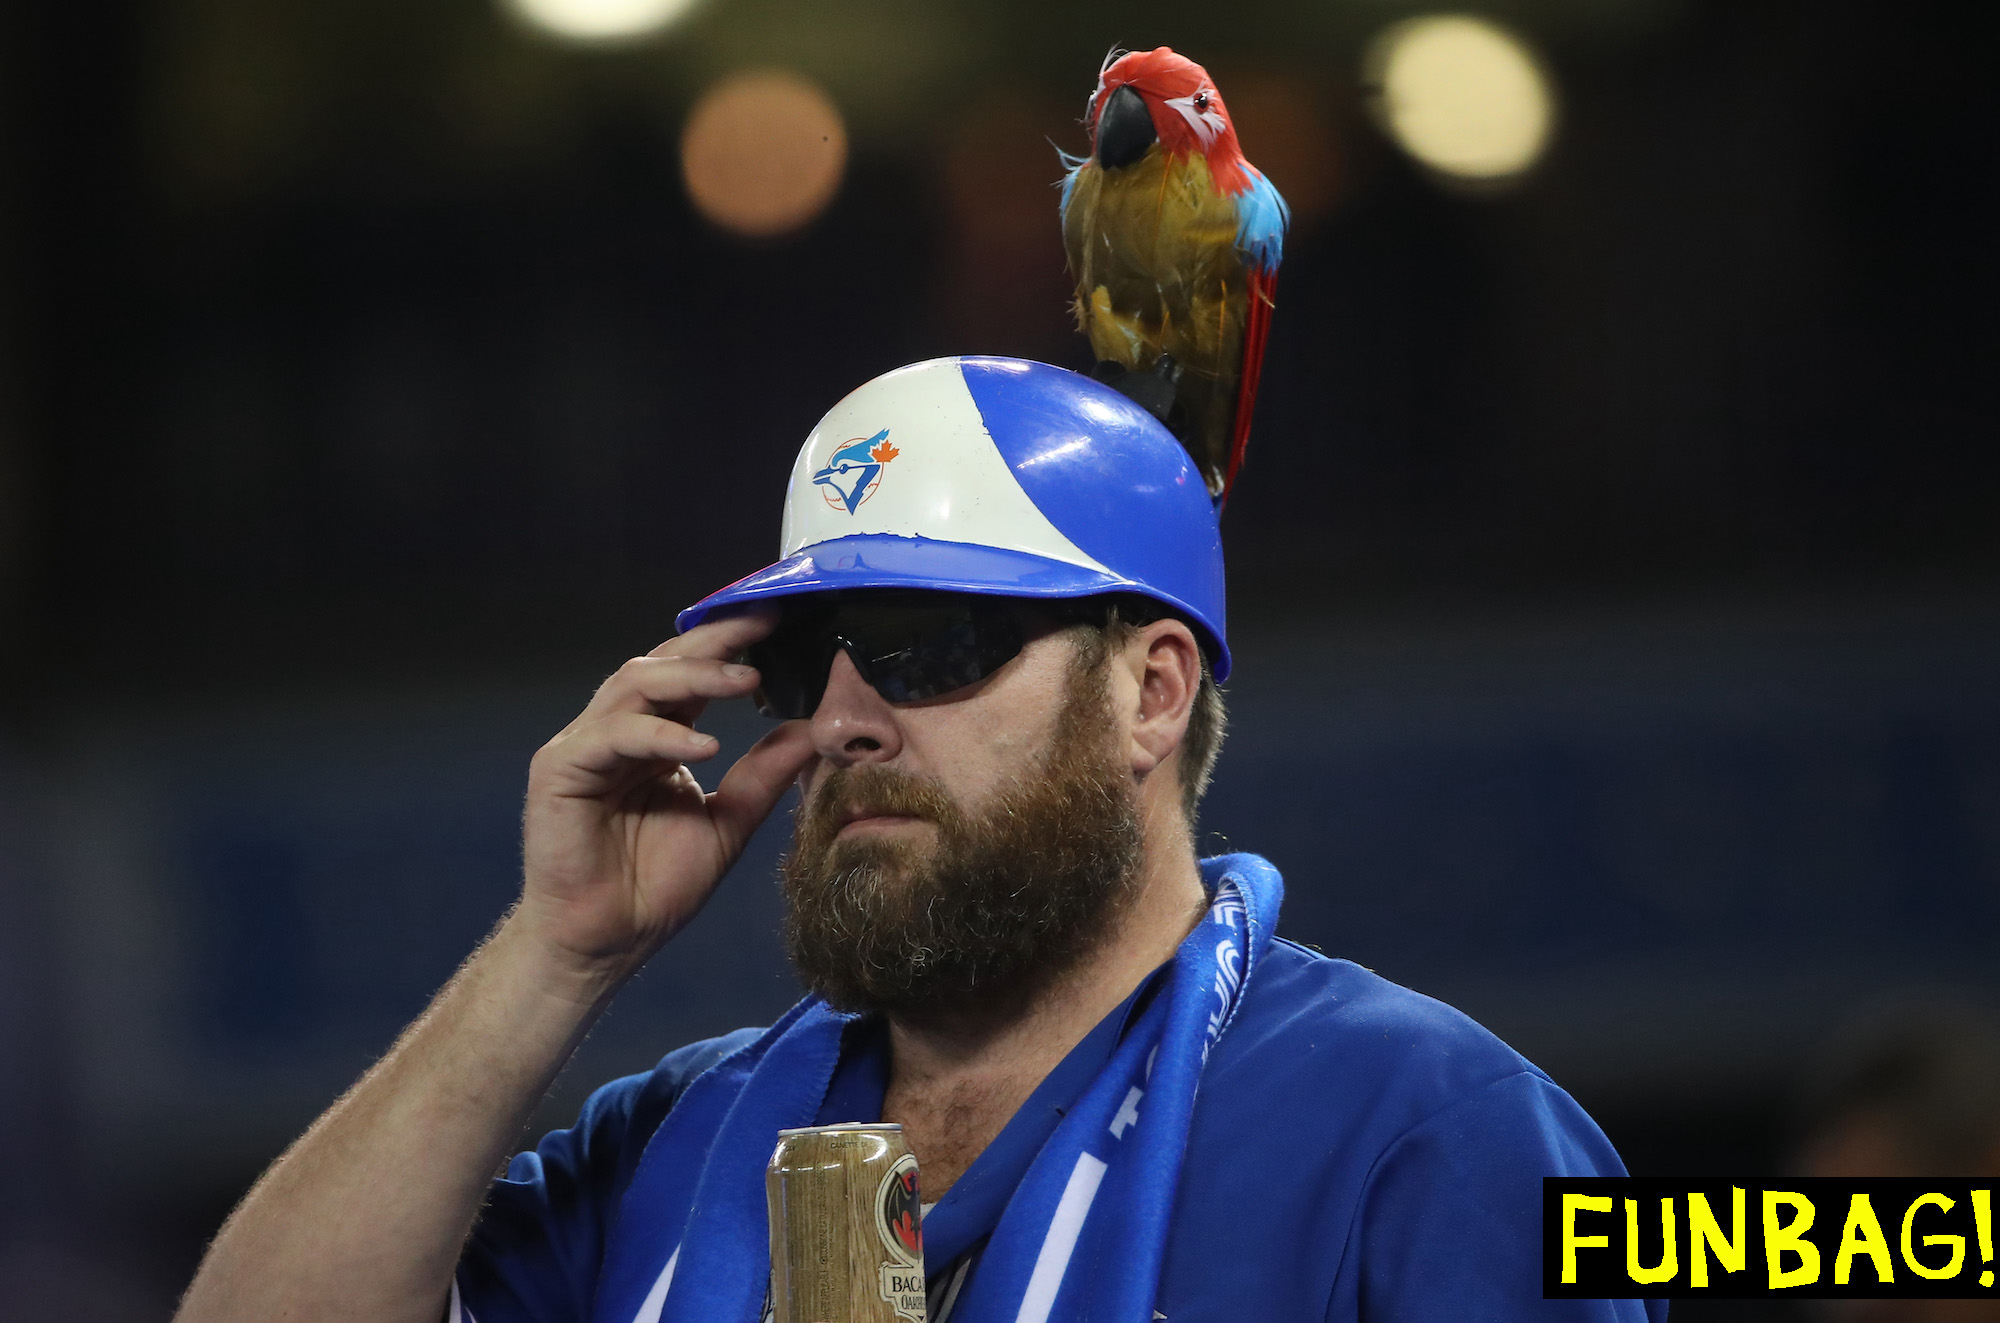 TORONTO, CANADA - SEPTEMBER 29: A Toronto Blue Jays fan wears a parrot on his helmet in homage to the home run power of Edwin Encarnacion #10 during MLB game action against the Baltimore Orioles on September 29, 2016 at Rogers Centre in Toronto, Ontario, Canada. (Photo by Tom Szczerbowski/Getty Images) *** Local Caption *** Edwin Encarnacion